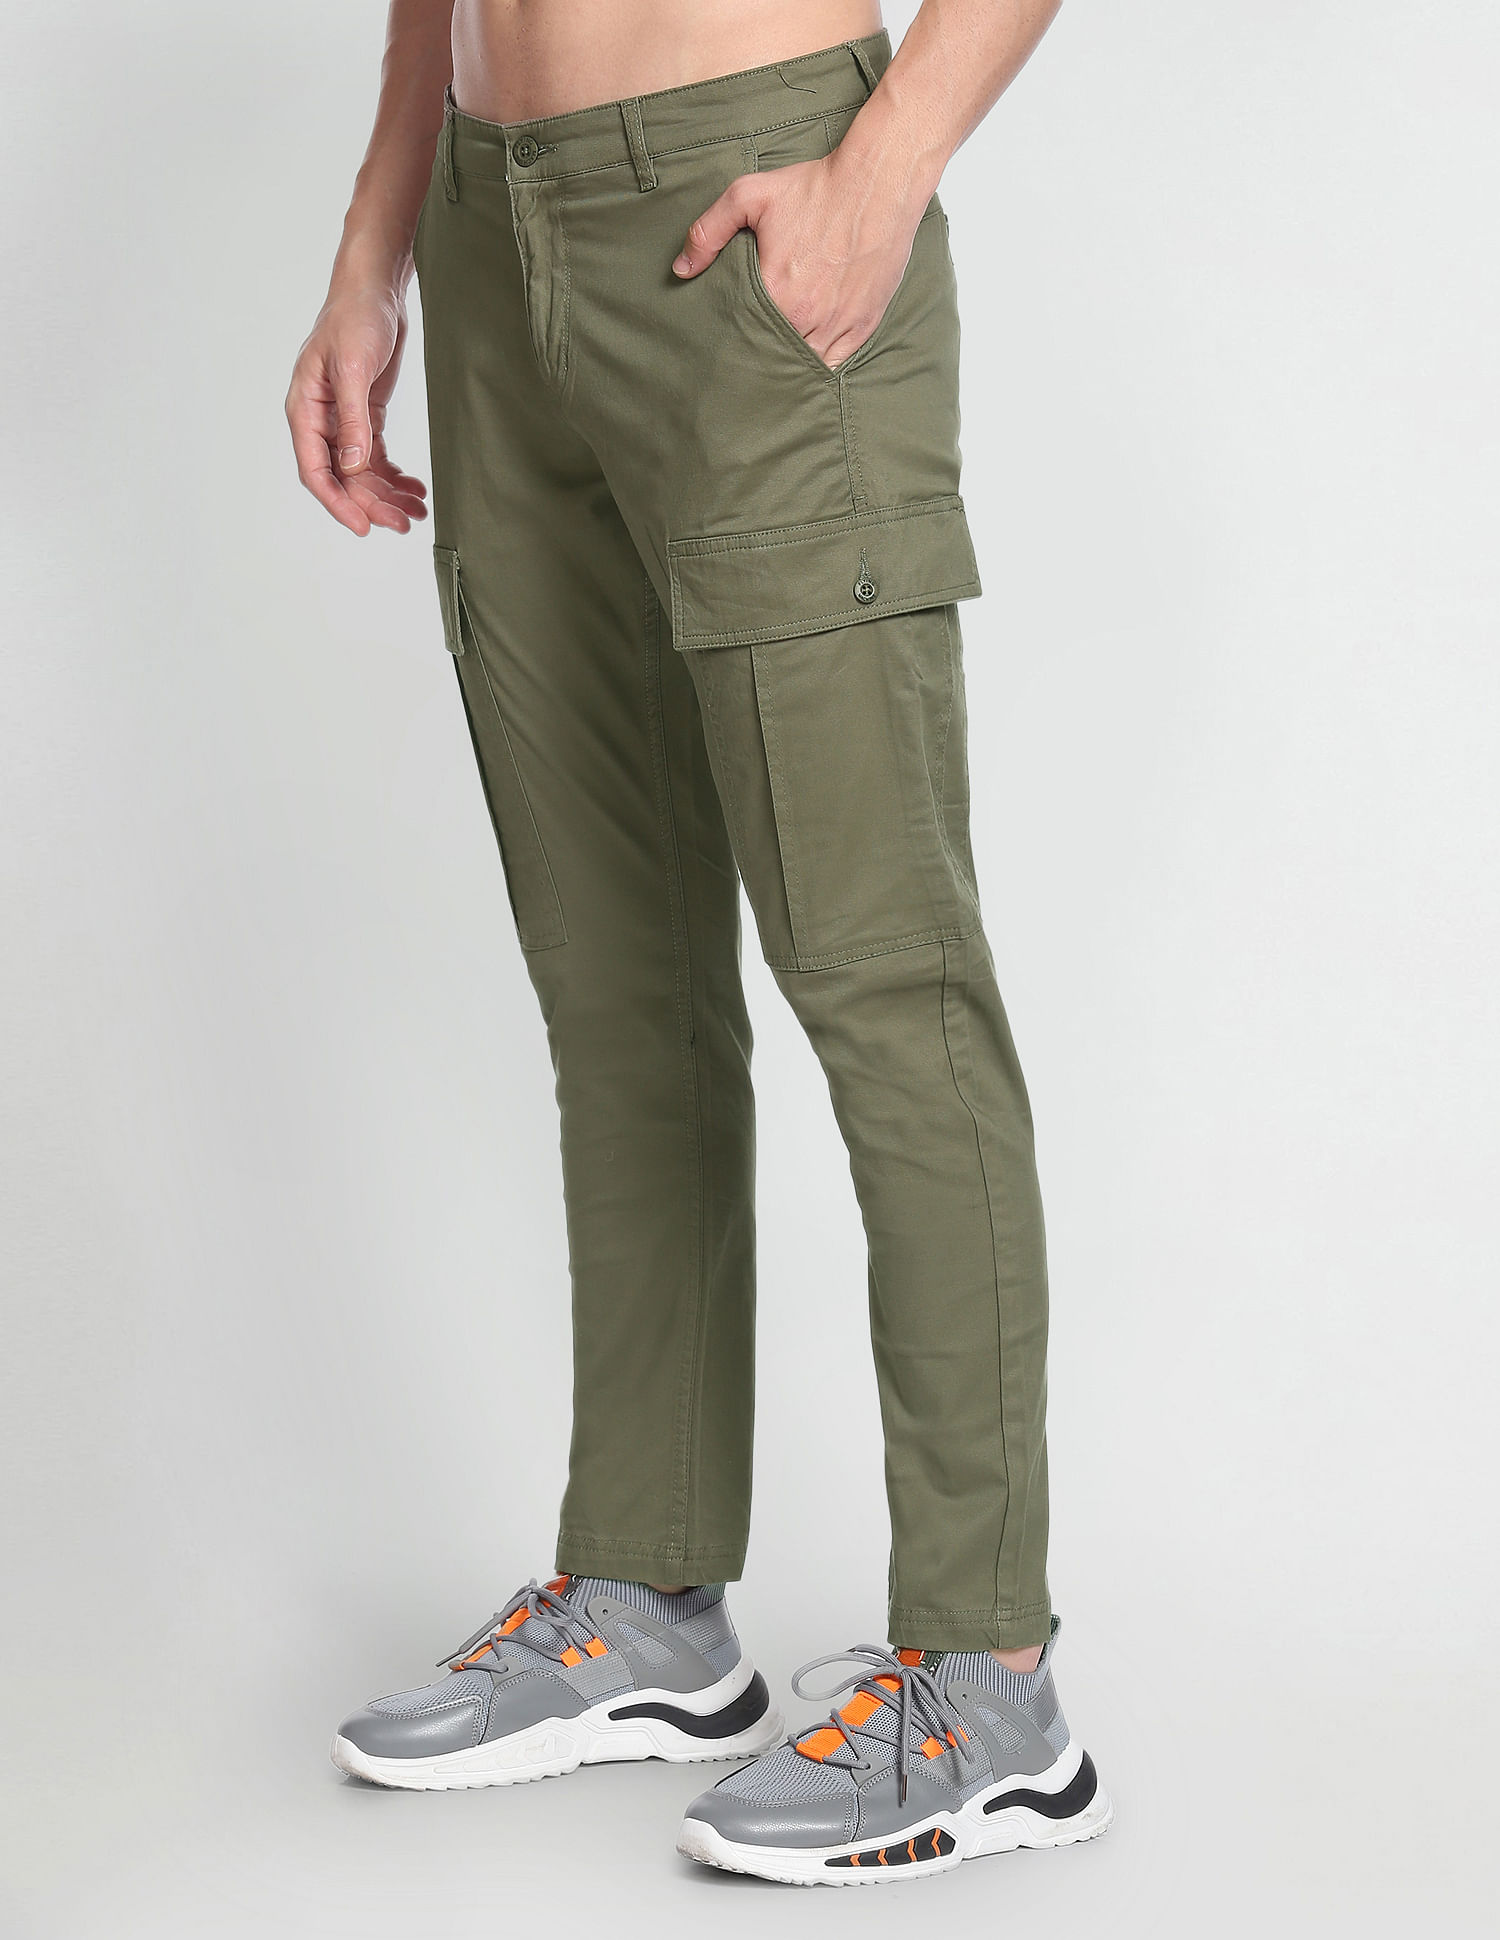 Mens Cargo Pant  Shop Cargo Style Trousers for Men at Mufti